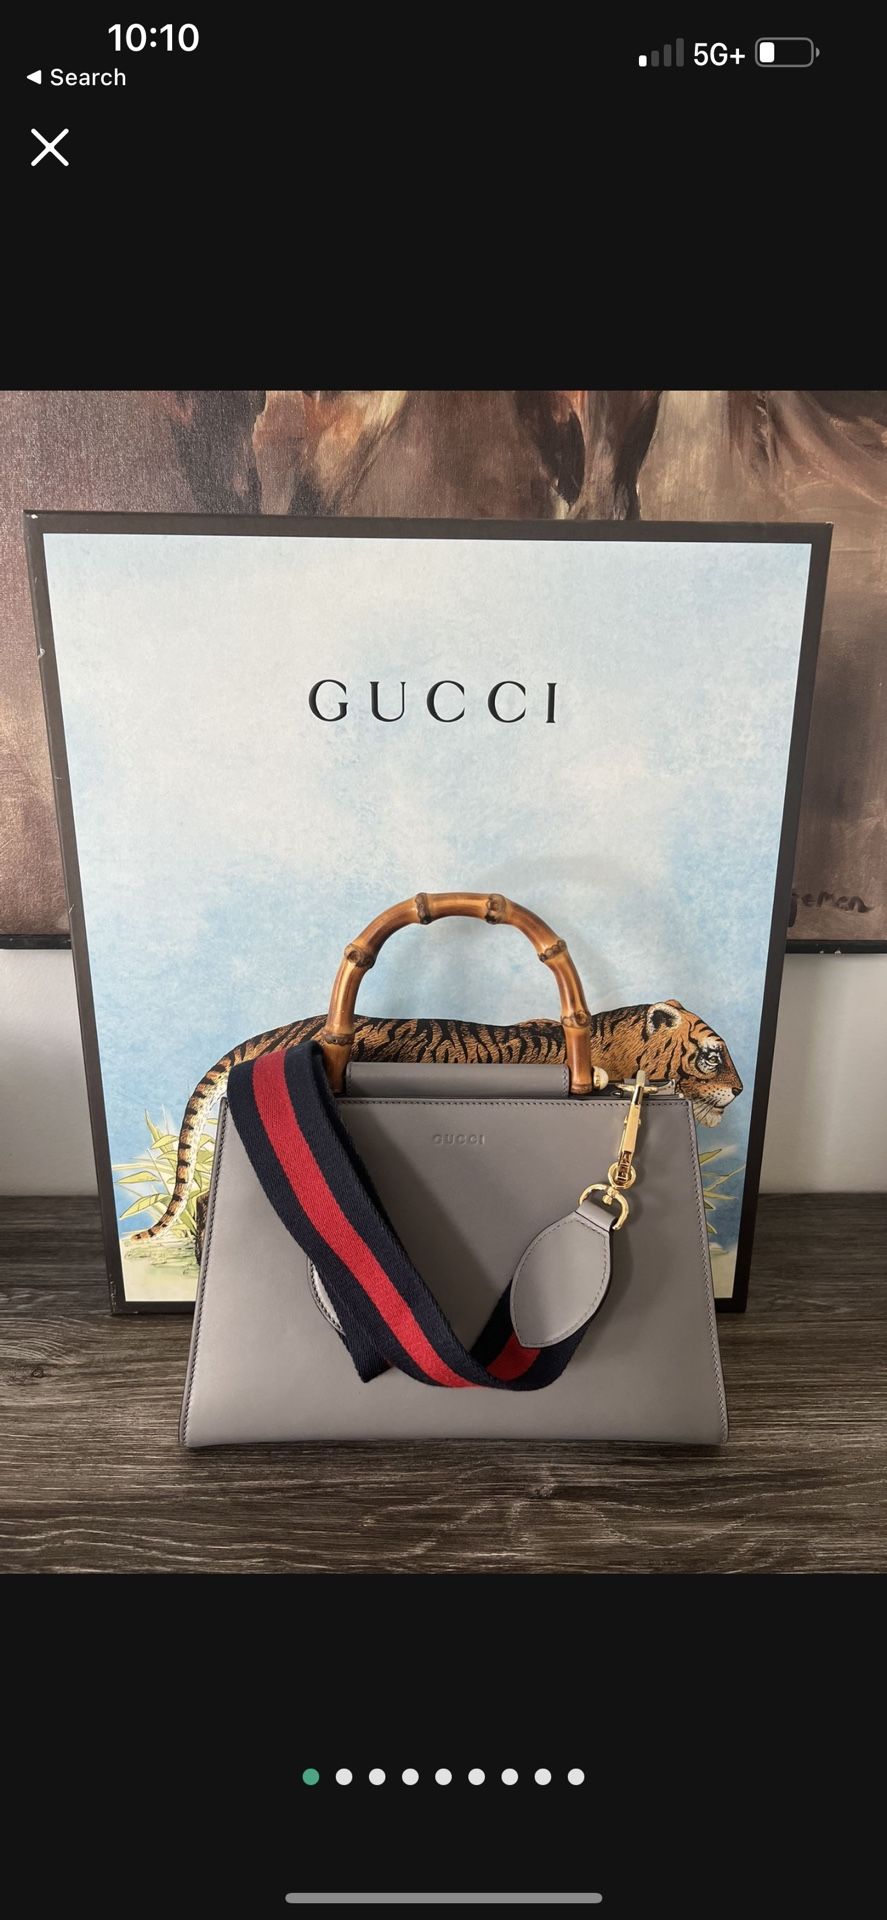 Gucci Grey & Ivory Leather Nymphaea Bamboo Top Handle Bag